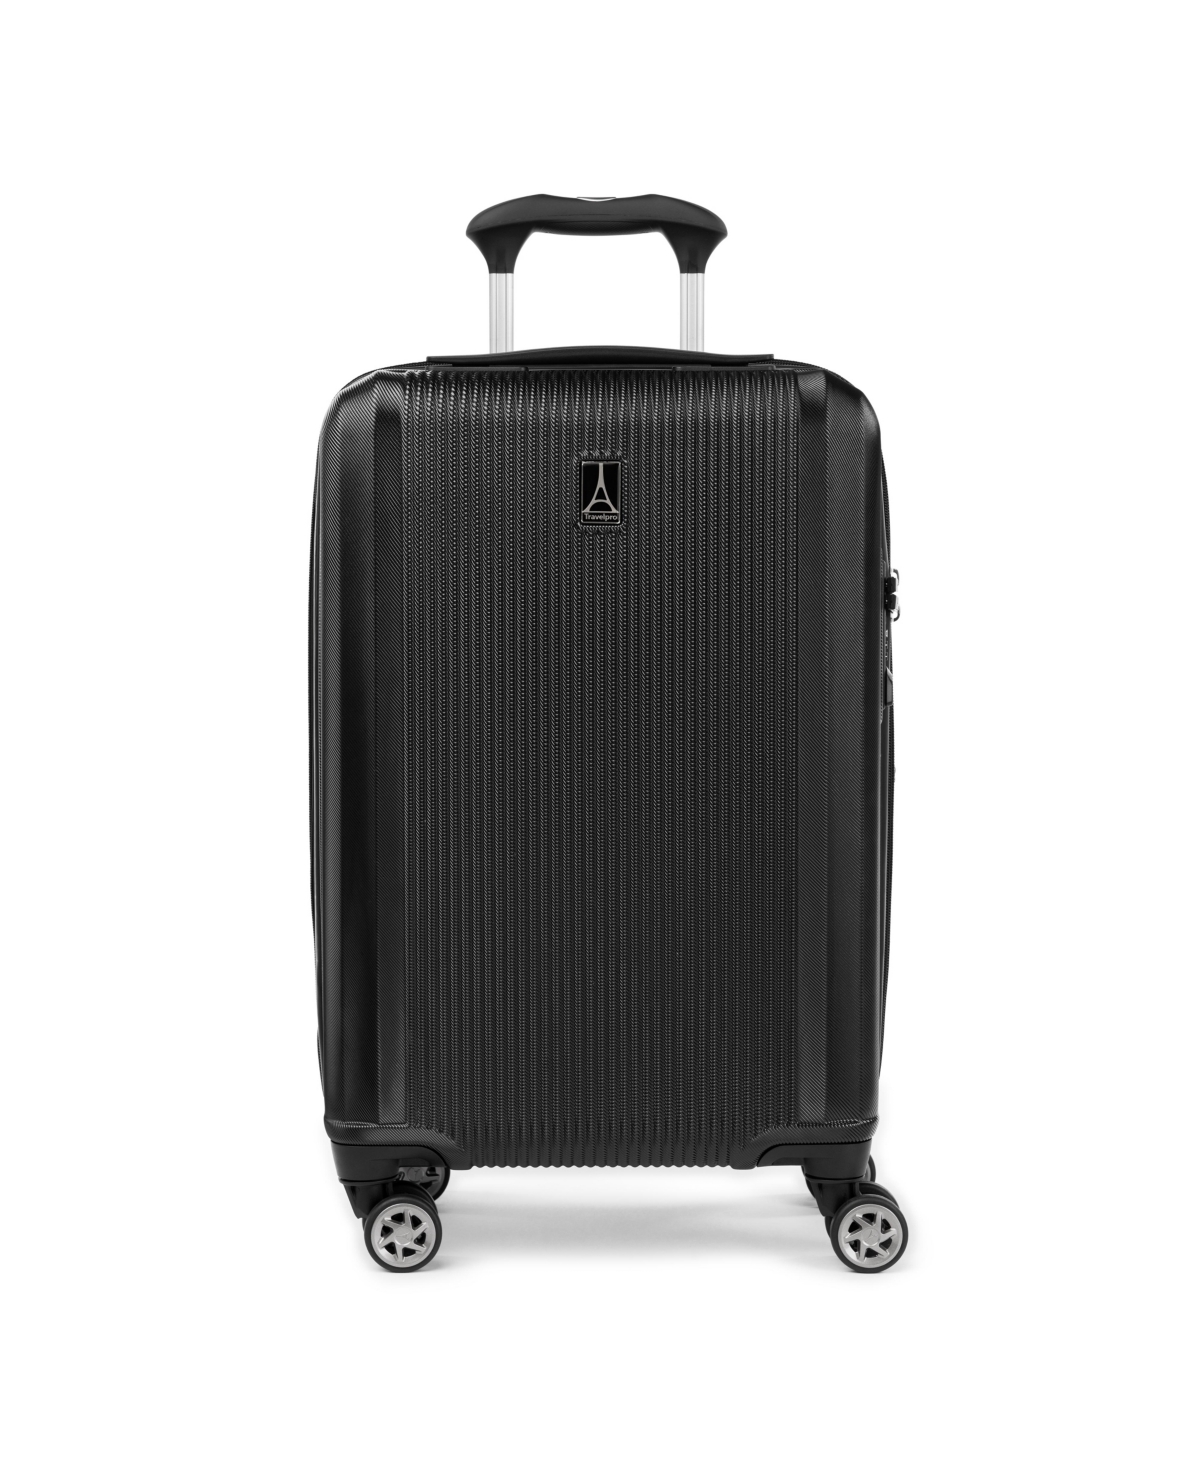 WalkAbout 6 Carry-on Expandable Hardside Spinner, Created for Macy's - Mediterranea